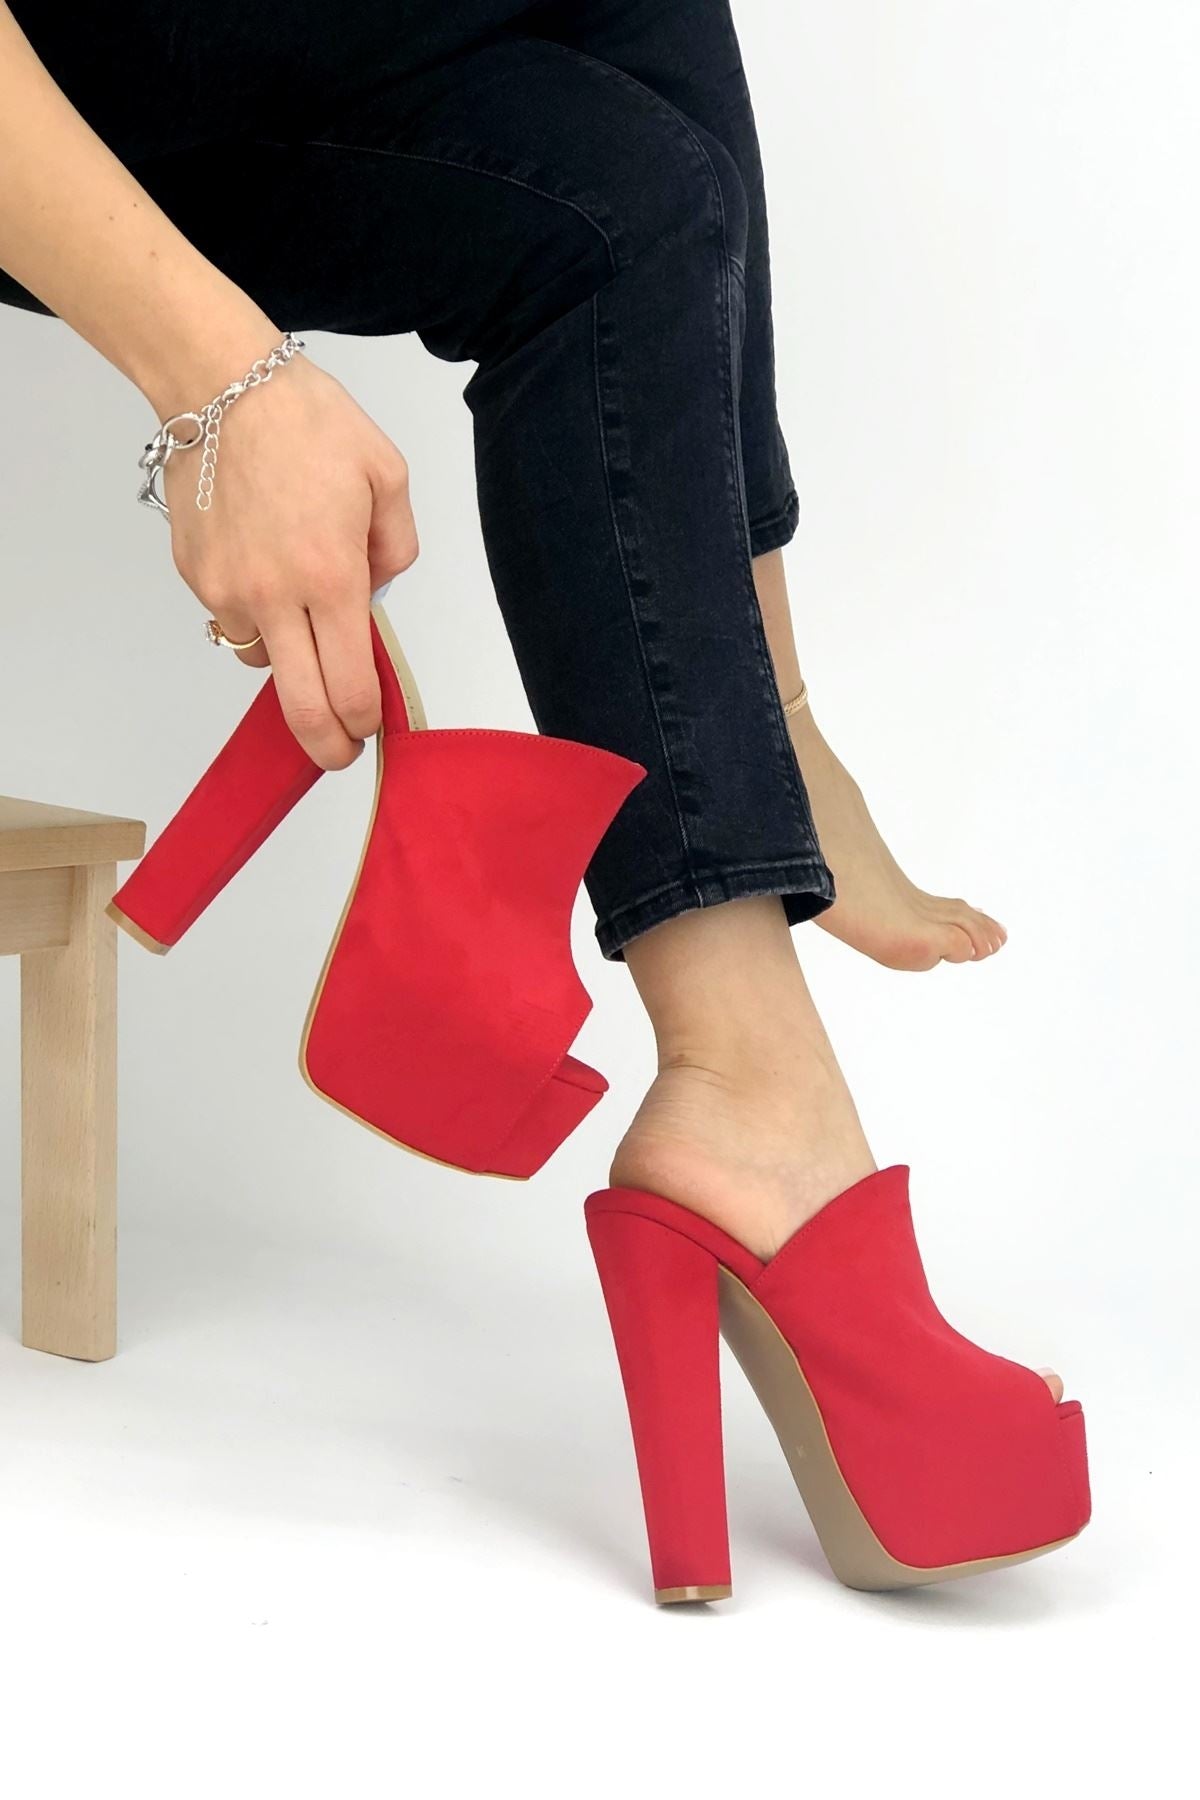 Image of Women's Red Suede Heeled Slippers